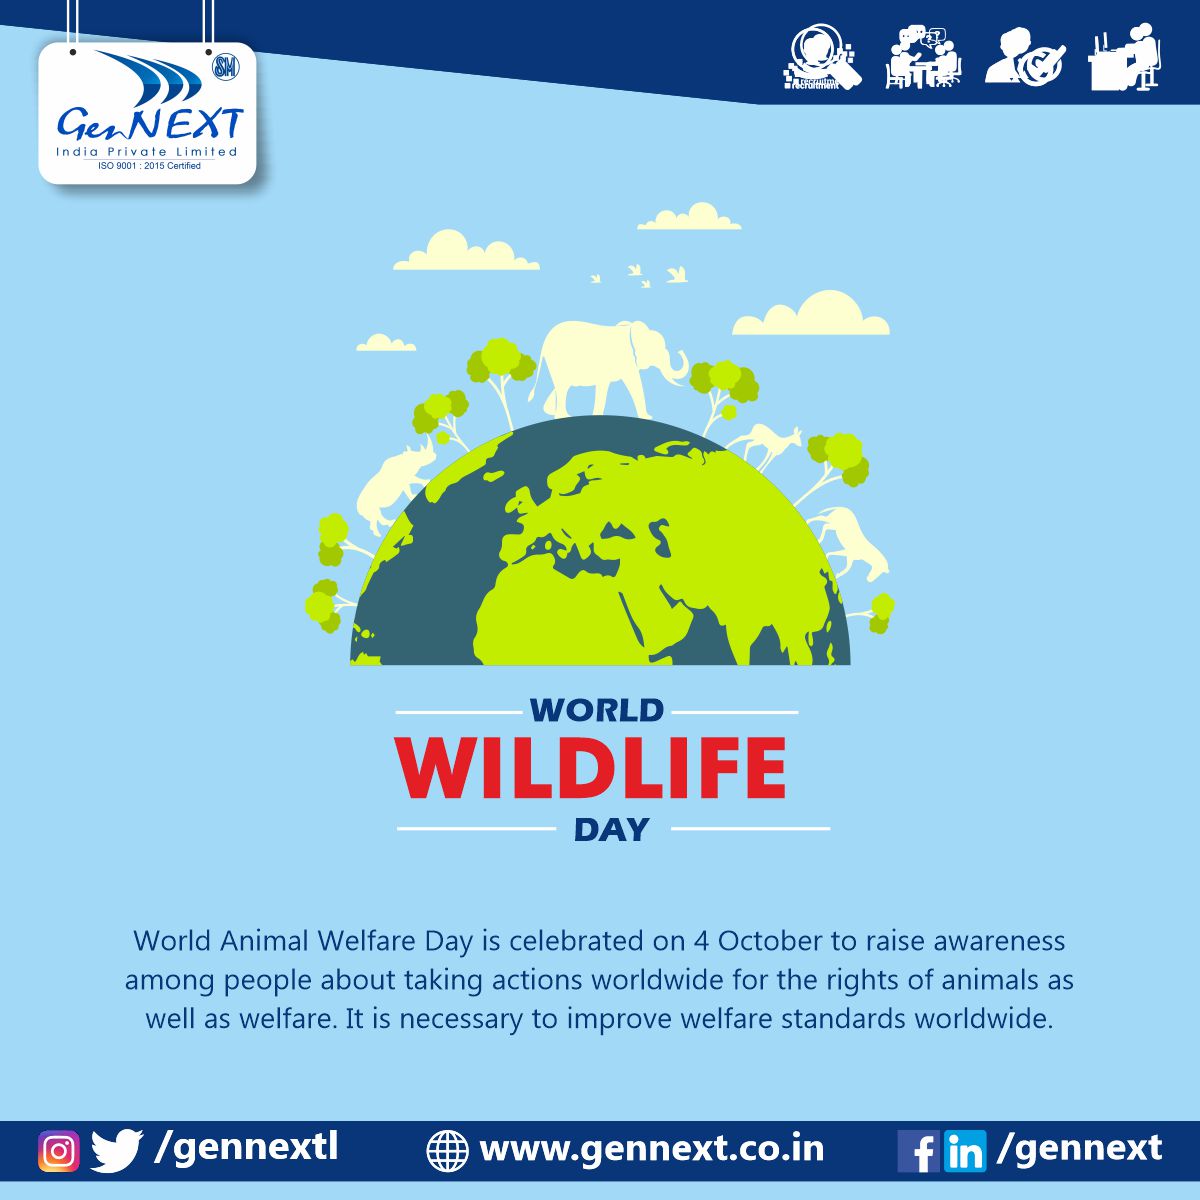 World Animal Welfare Day is celebrated on 4 October to raise awareness among people about taking actions worldwide for the rights of animals as well as welfare. It is necessary to improve welfare standards worldwide.

#worldanimalwelfareday #gennext #gennextjob #gennextindia